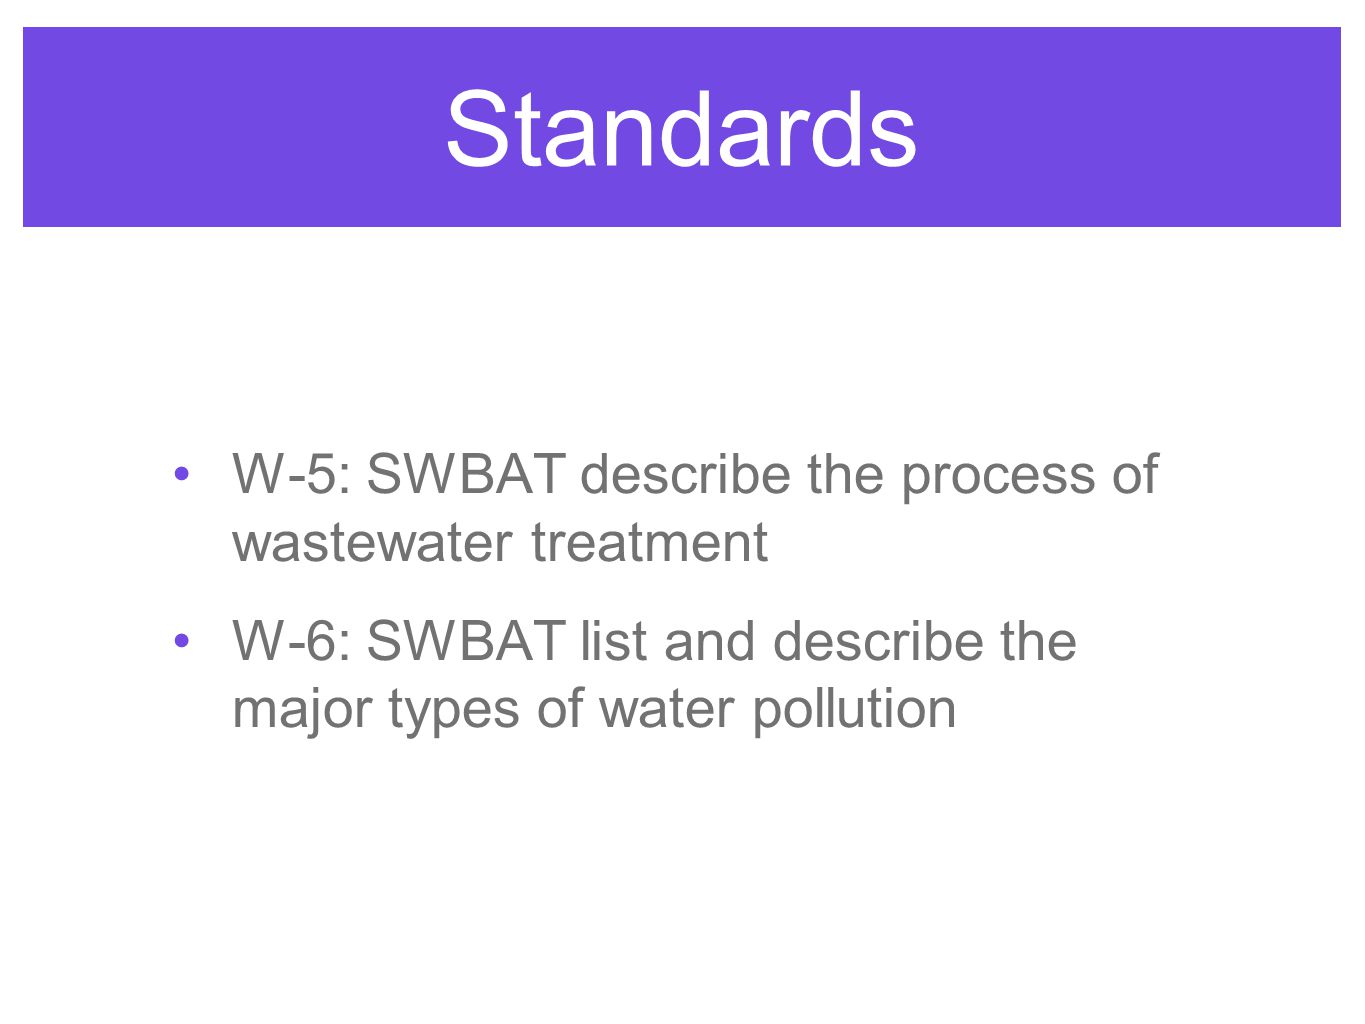 Standards W-5: SWBAT describe the process of wastewater treatment